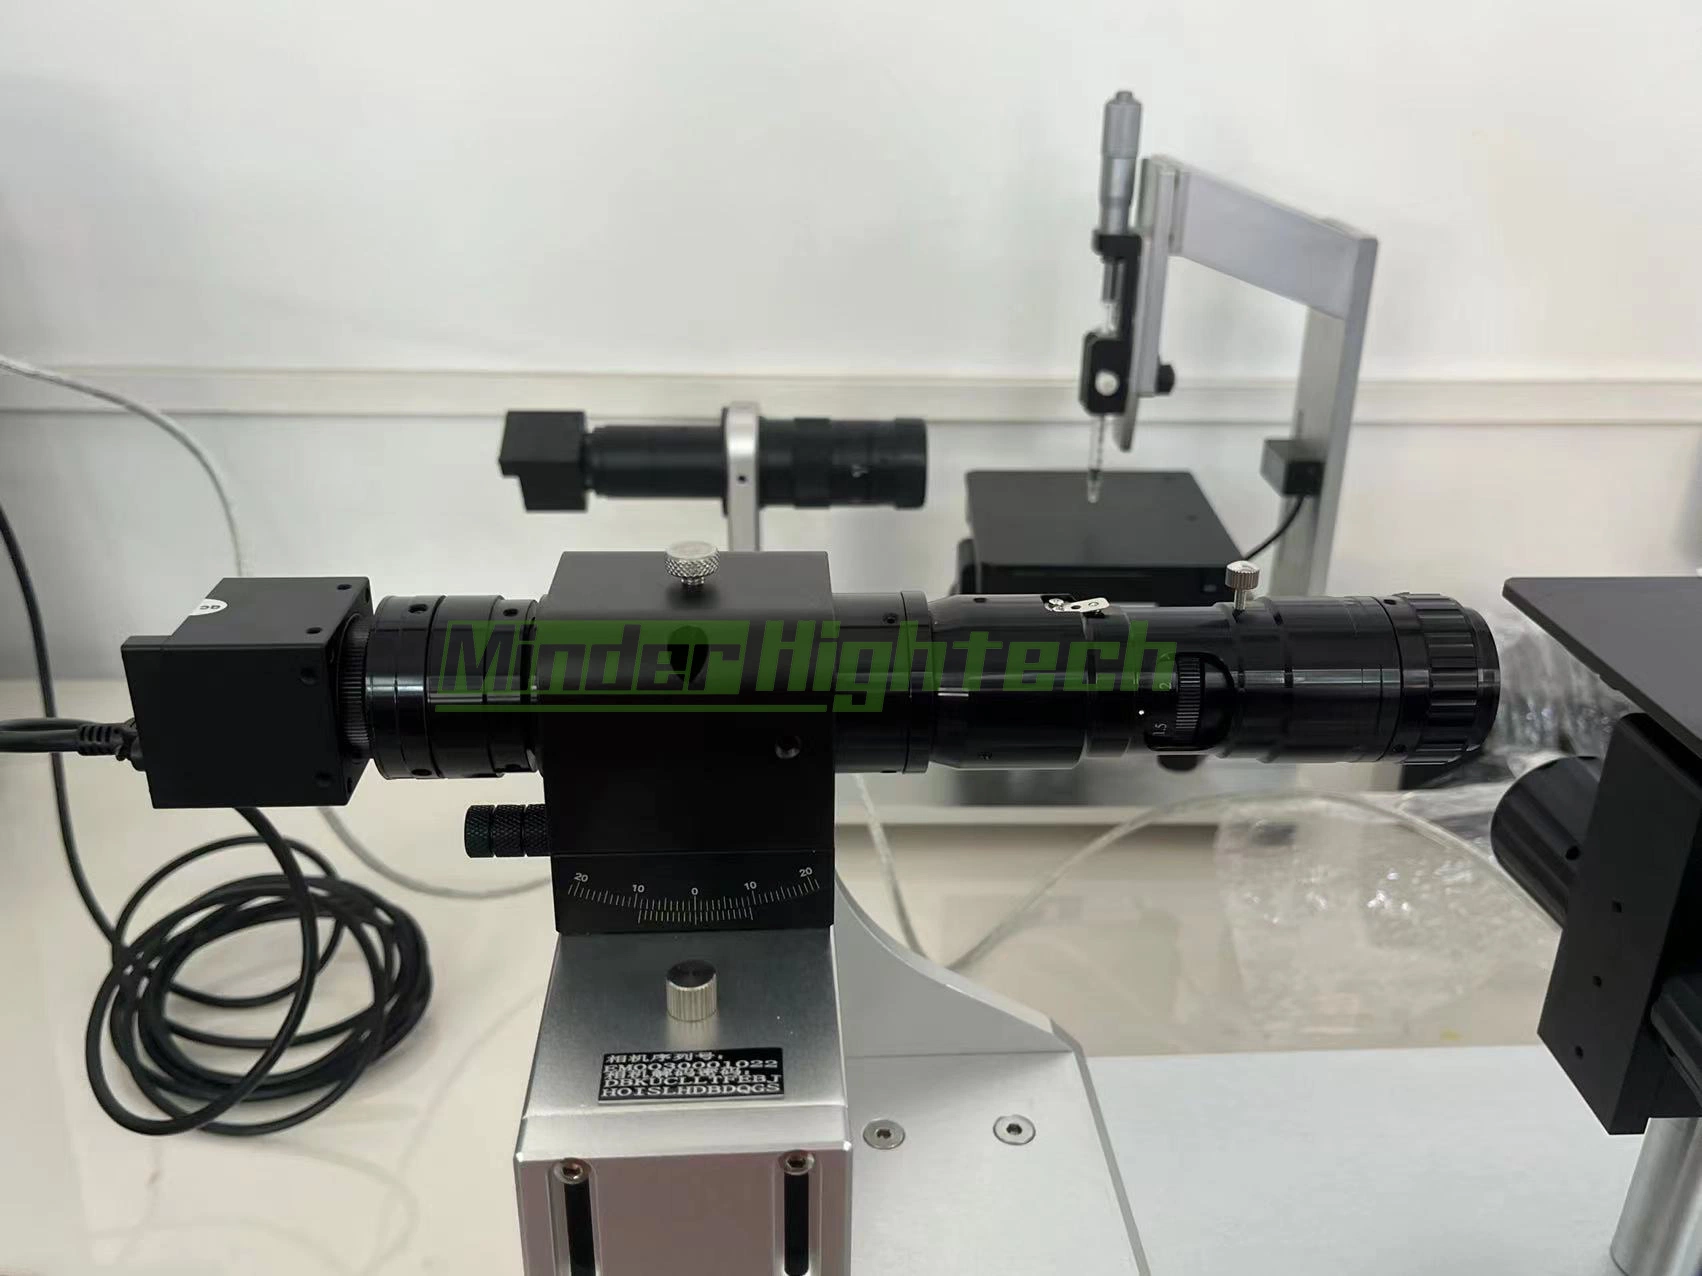 Sdc-200s Contact Angle Measure Insturement/Automatic Tilt Contact Angle Measuring Tester